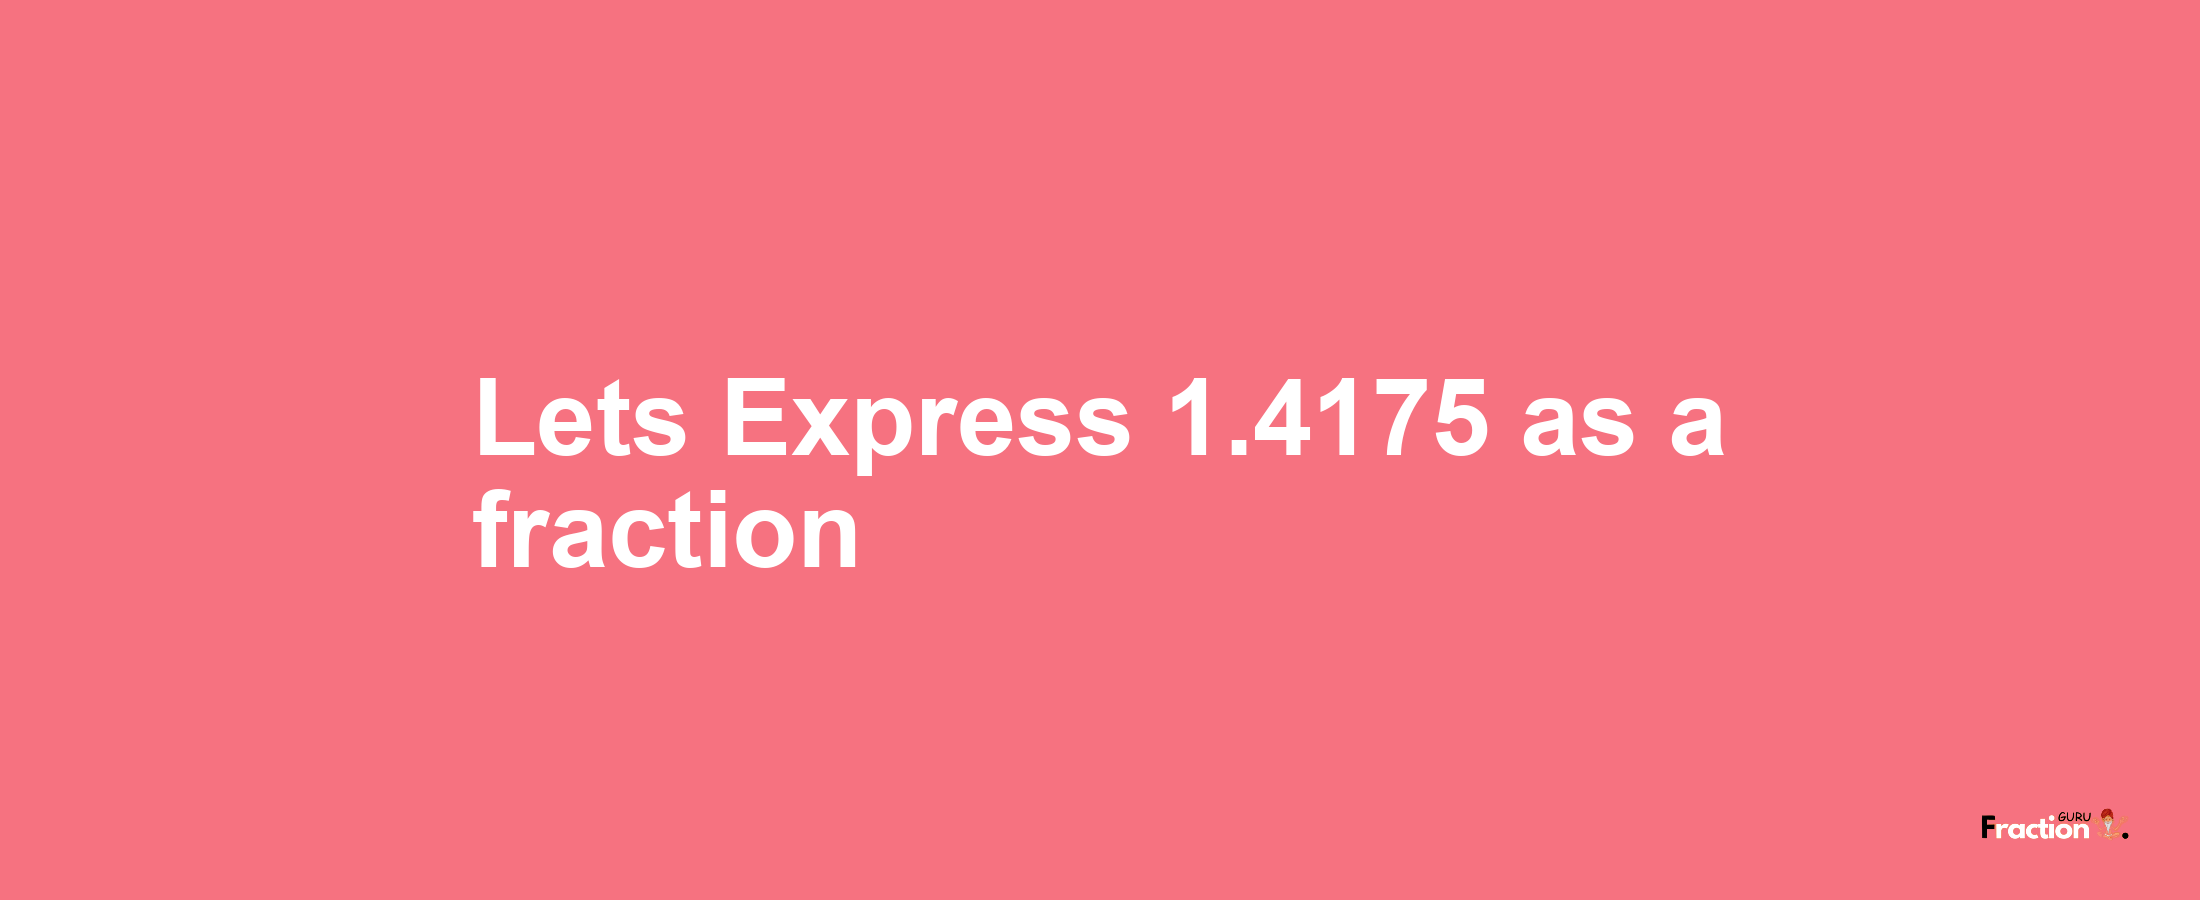 Lets Express 1.4175 as afraction